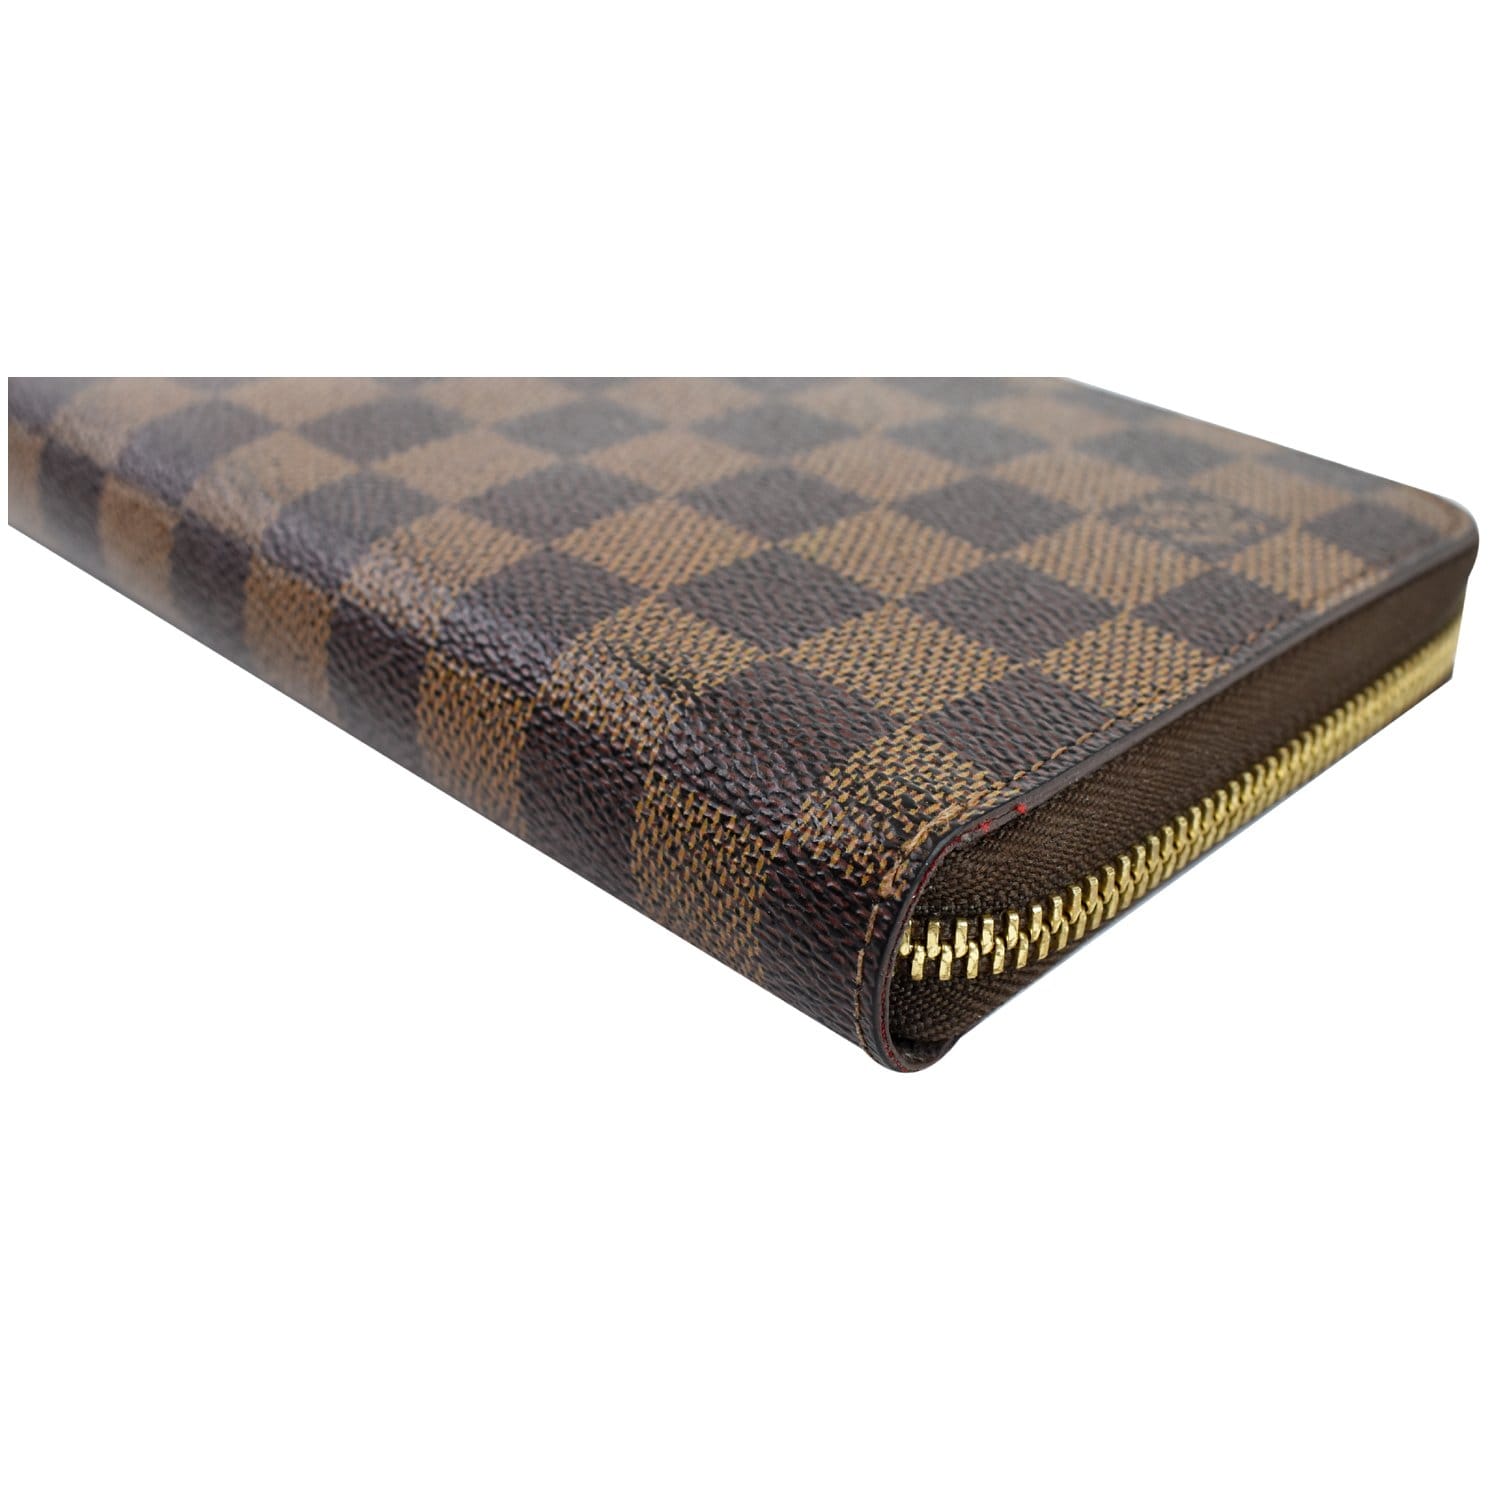 Louis Vuitton Zippy Wallet Zippy Wallet, Brown, * Inventory Confirmation Required